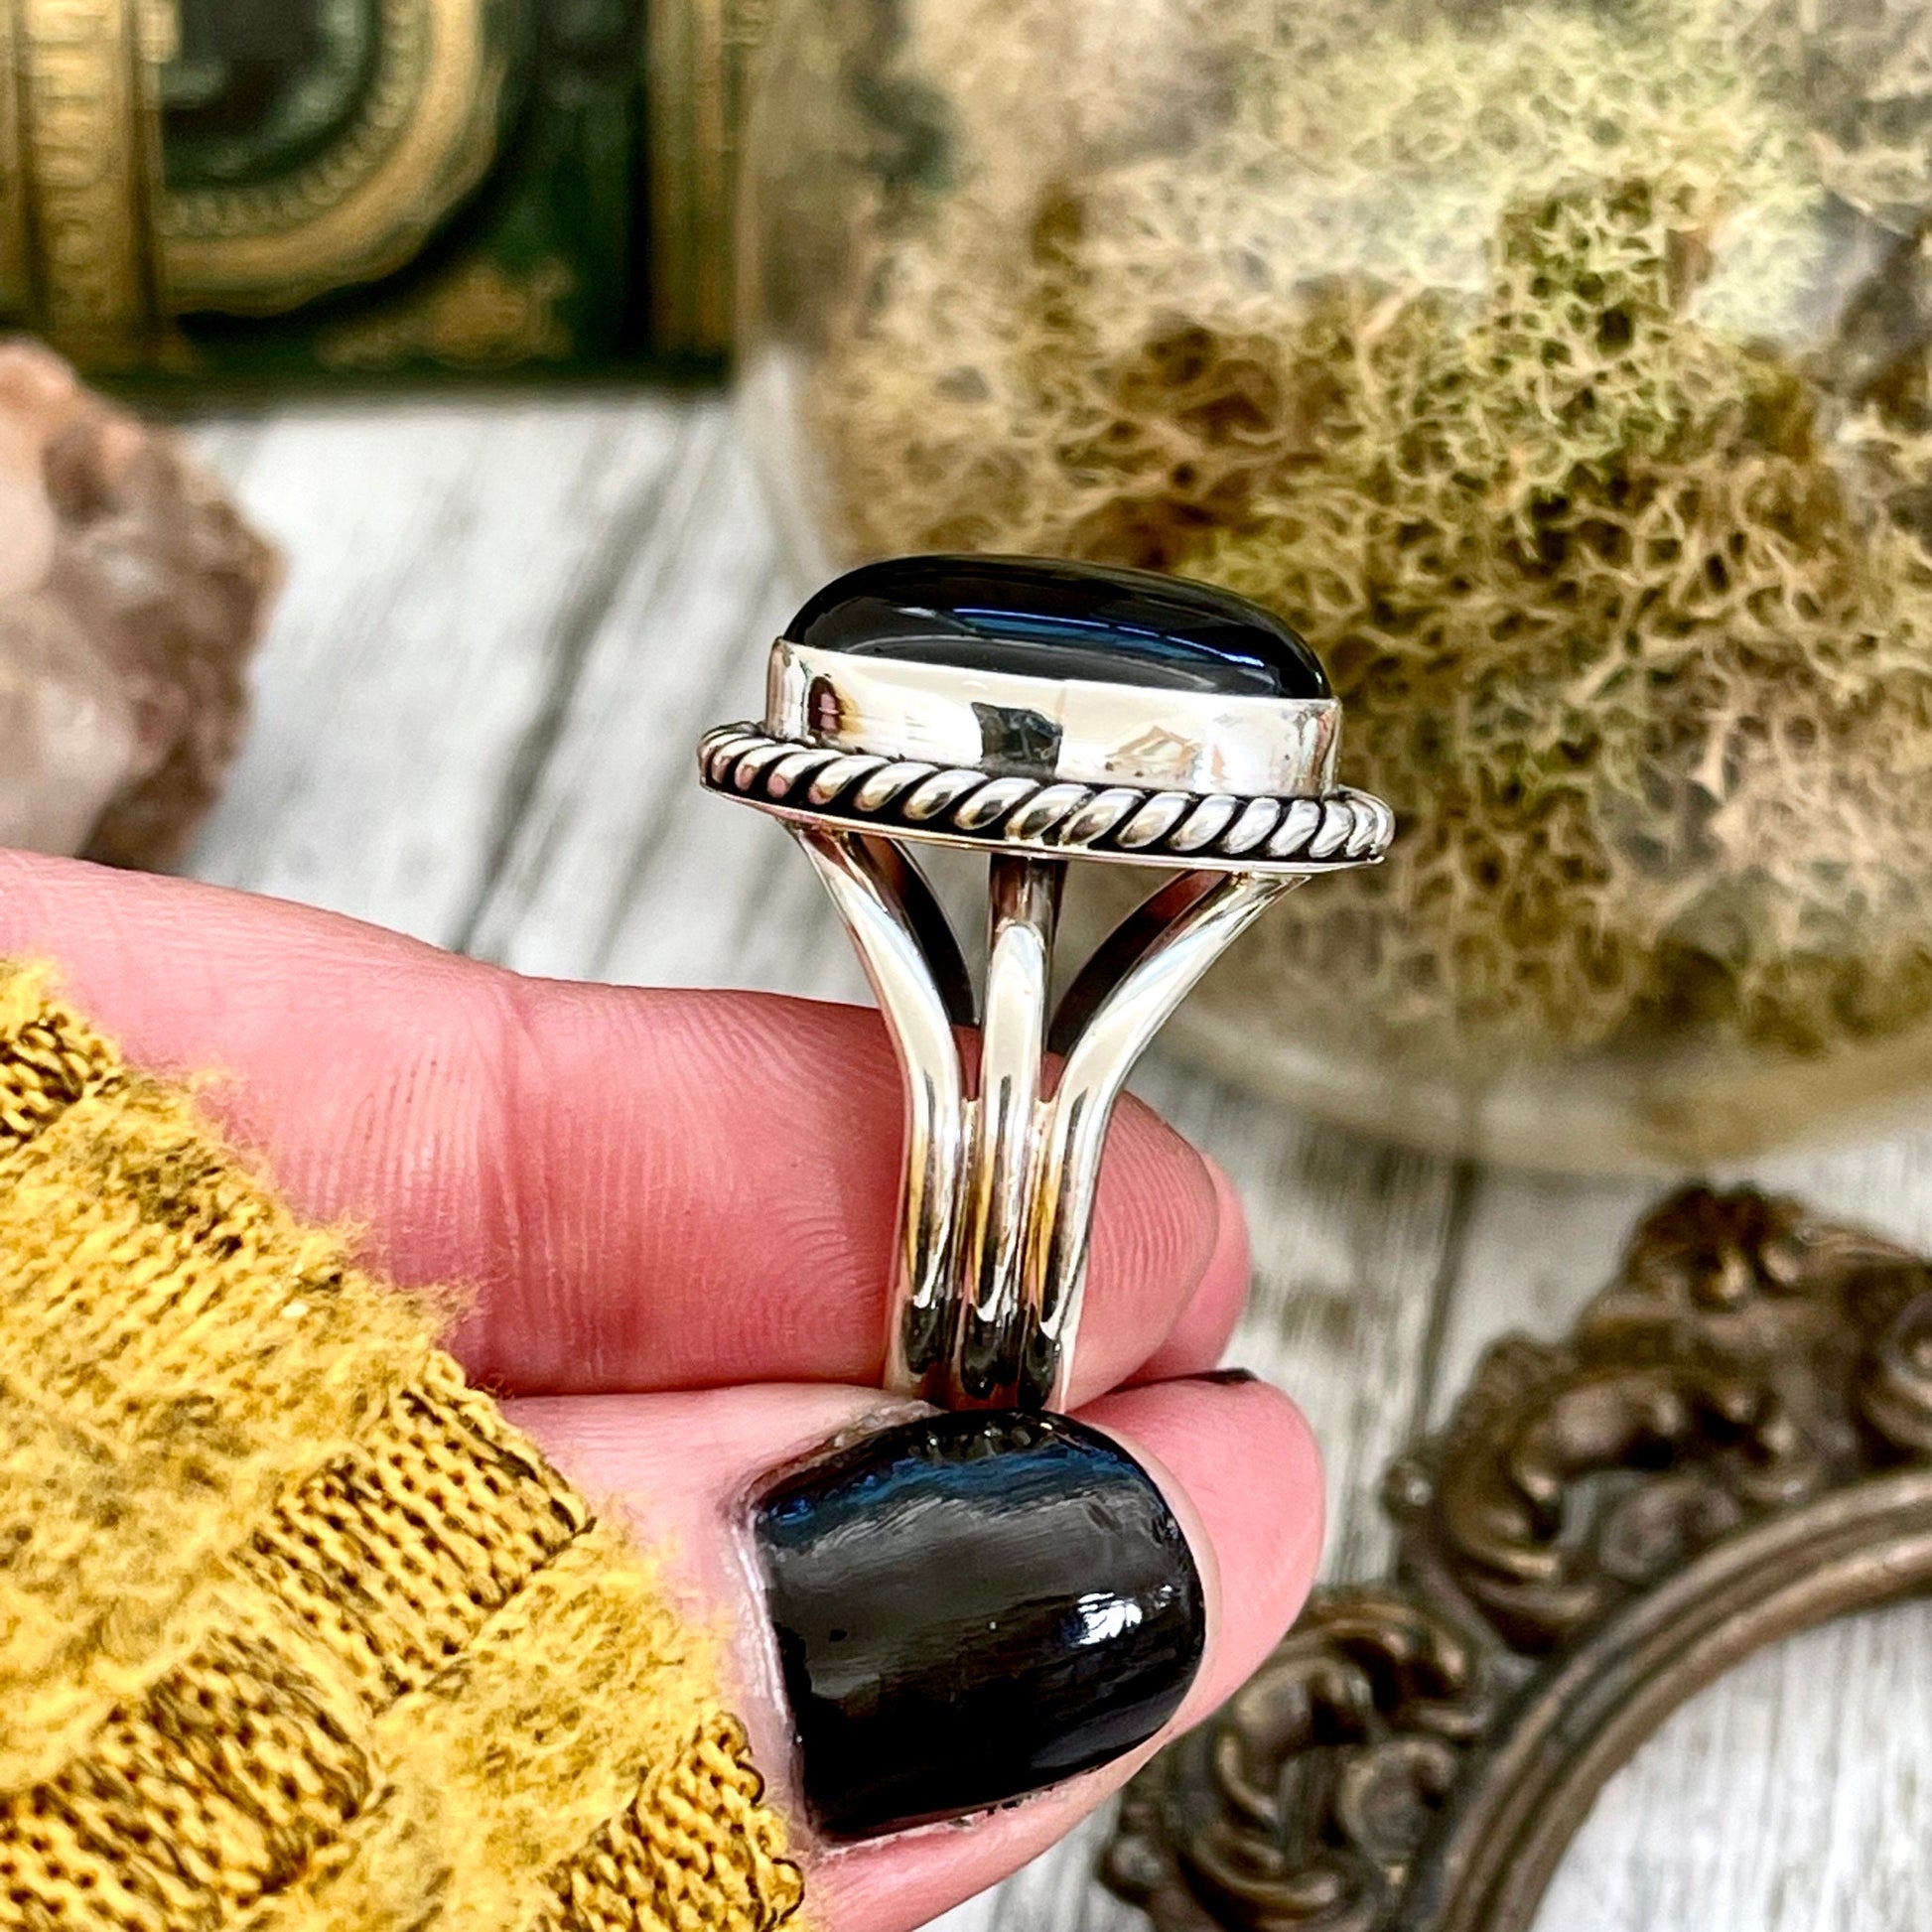 Big Statement Ring, Black Onyx Jewelry, Black Onyx Ring, Bohemian Ring, boho jewelry, boho ring, crystal ring, CURATED- RINGS, Etsy ID: 1339591103, Festival Jewelry, Foxlark Alchemy, gypsy ring, Jewelry, Large Crystal, Rings, Southwestern Jewelry, Stateme